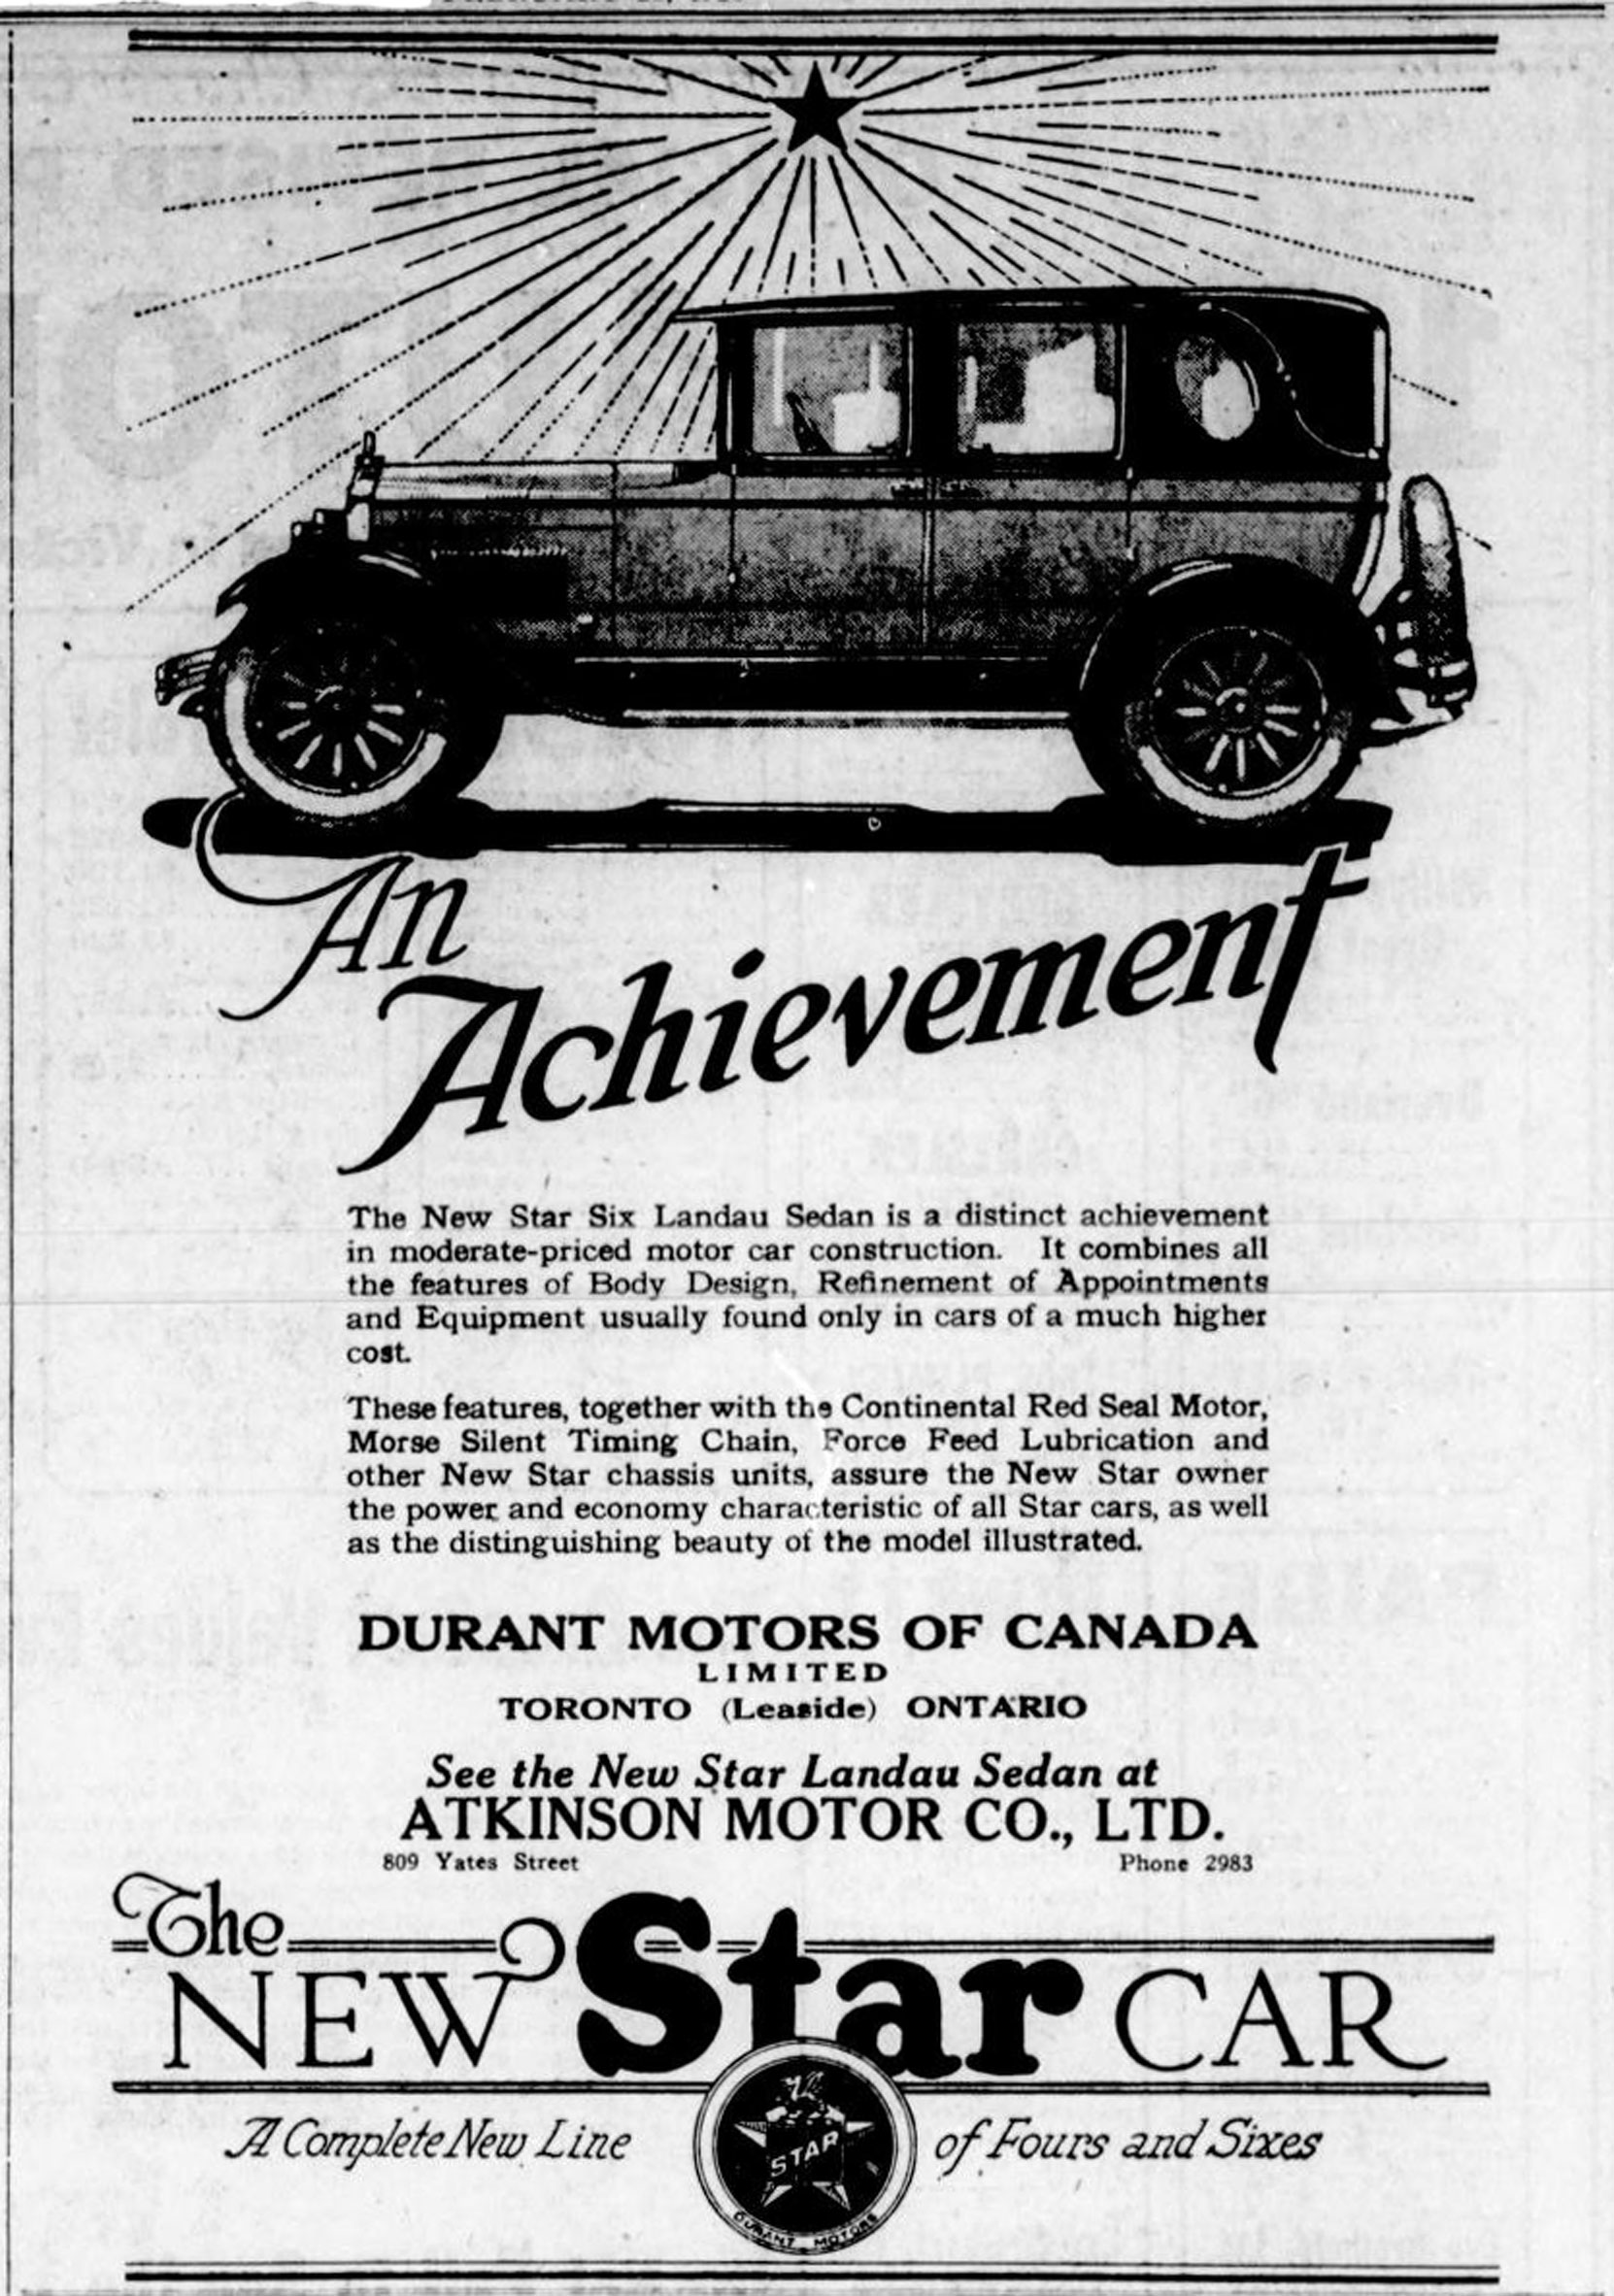 1926 advertisement for Rurant Motors of Canada, sold by Atkinson Motor Company, 809 Yates Street in downtown Victoria. (Victoria Online Sightseeing Tours Inc. collection)